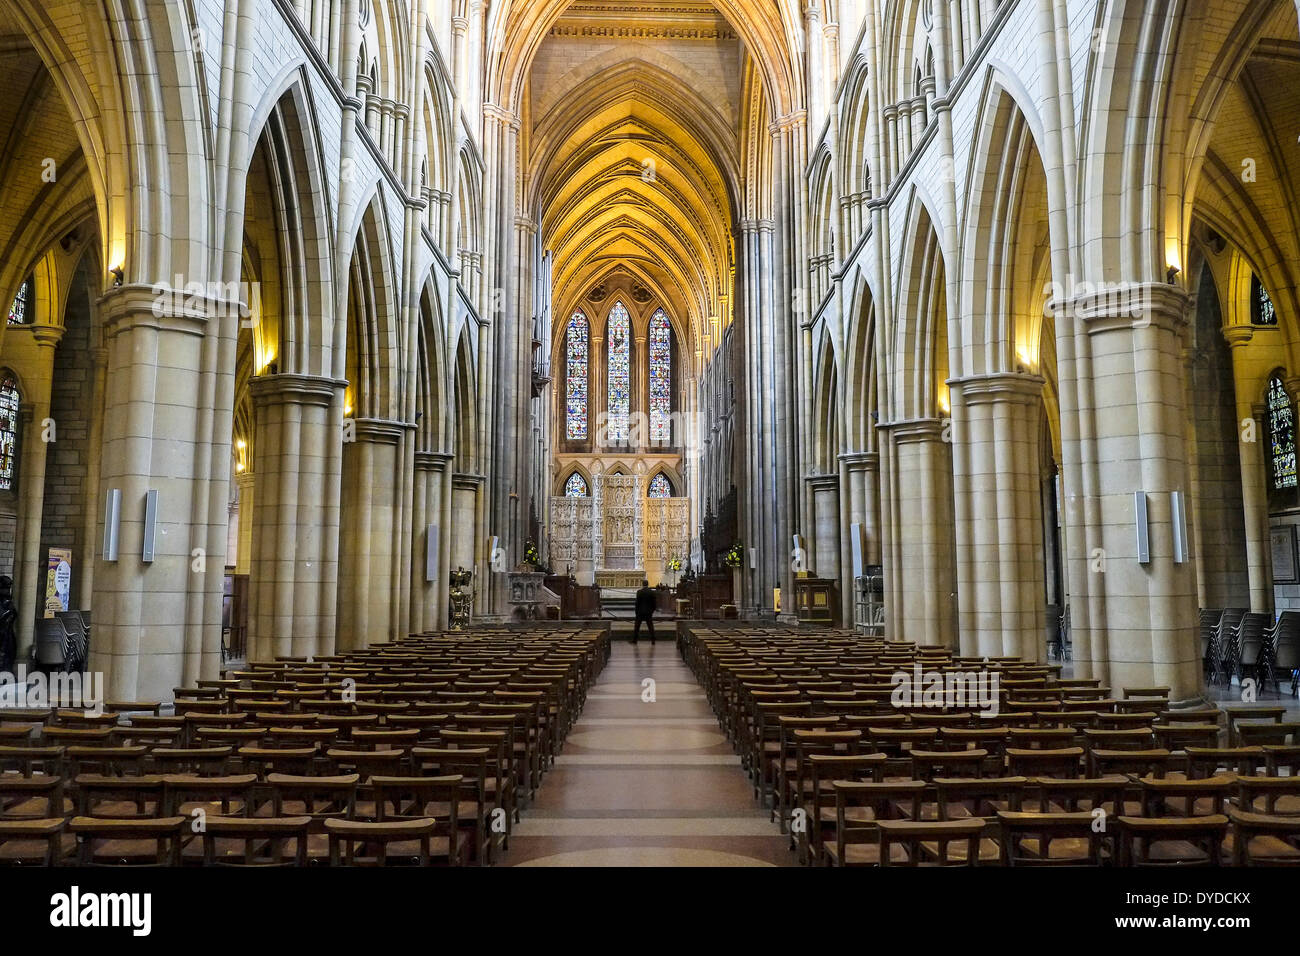 The interior of Truro Cathedral. Stock Photo